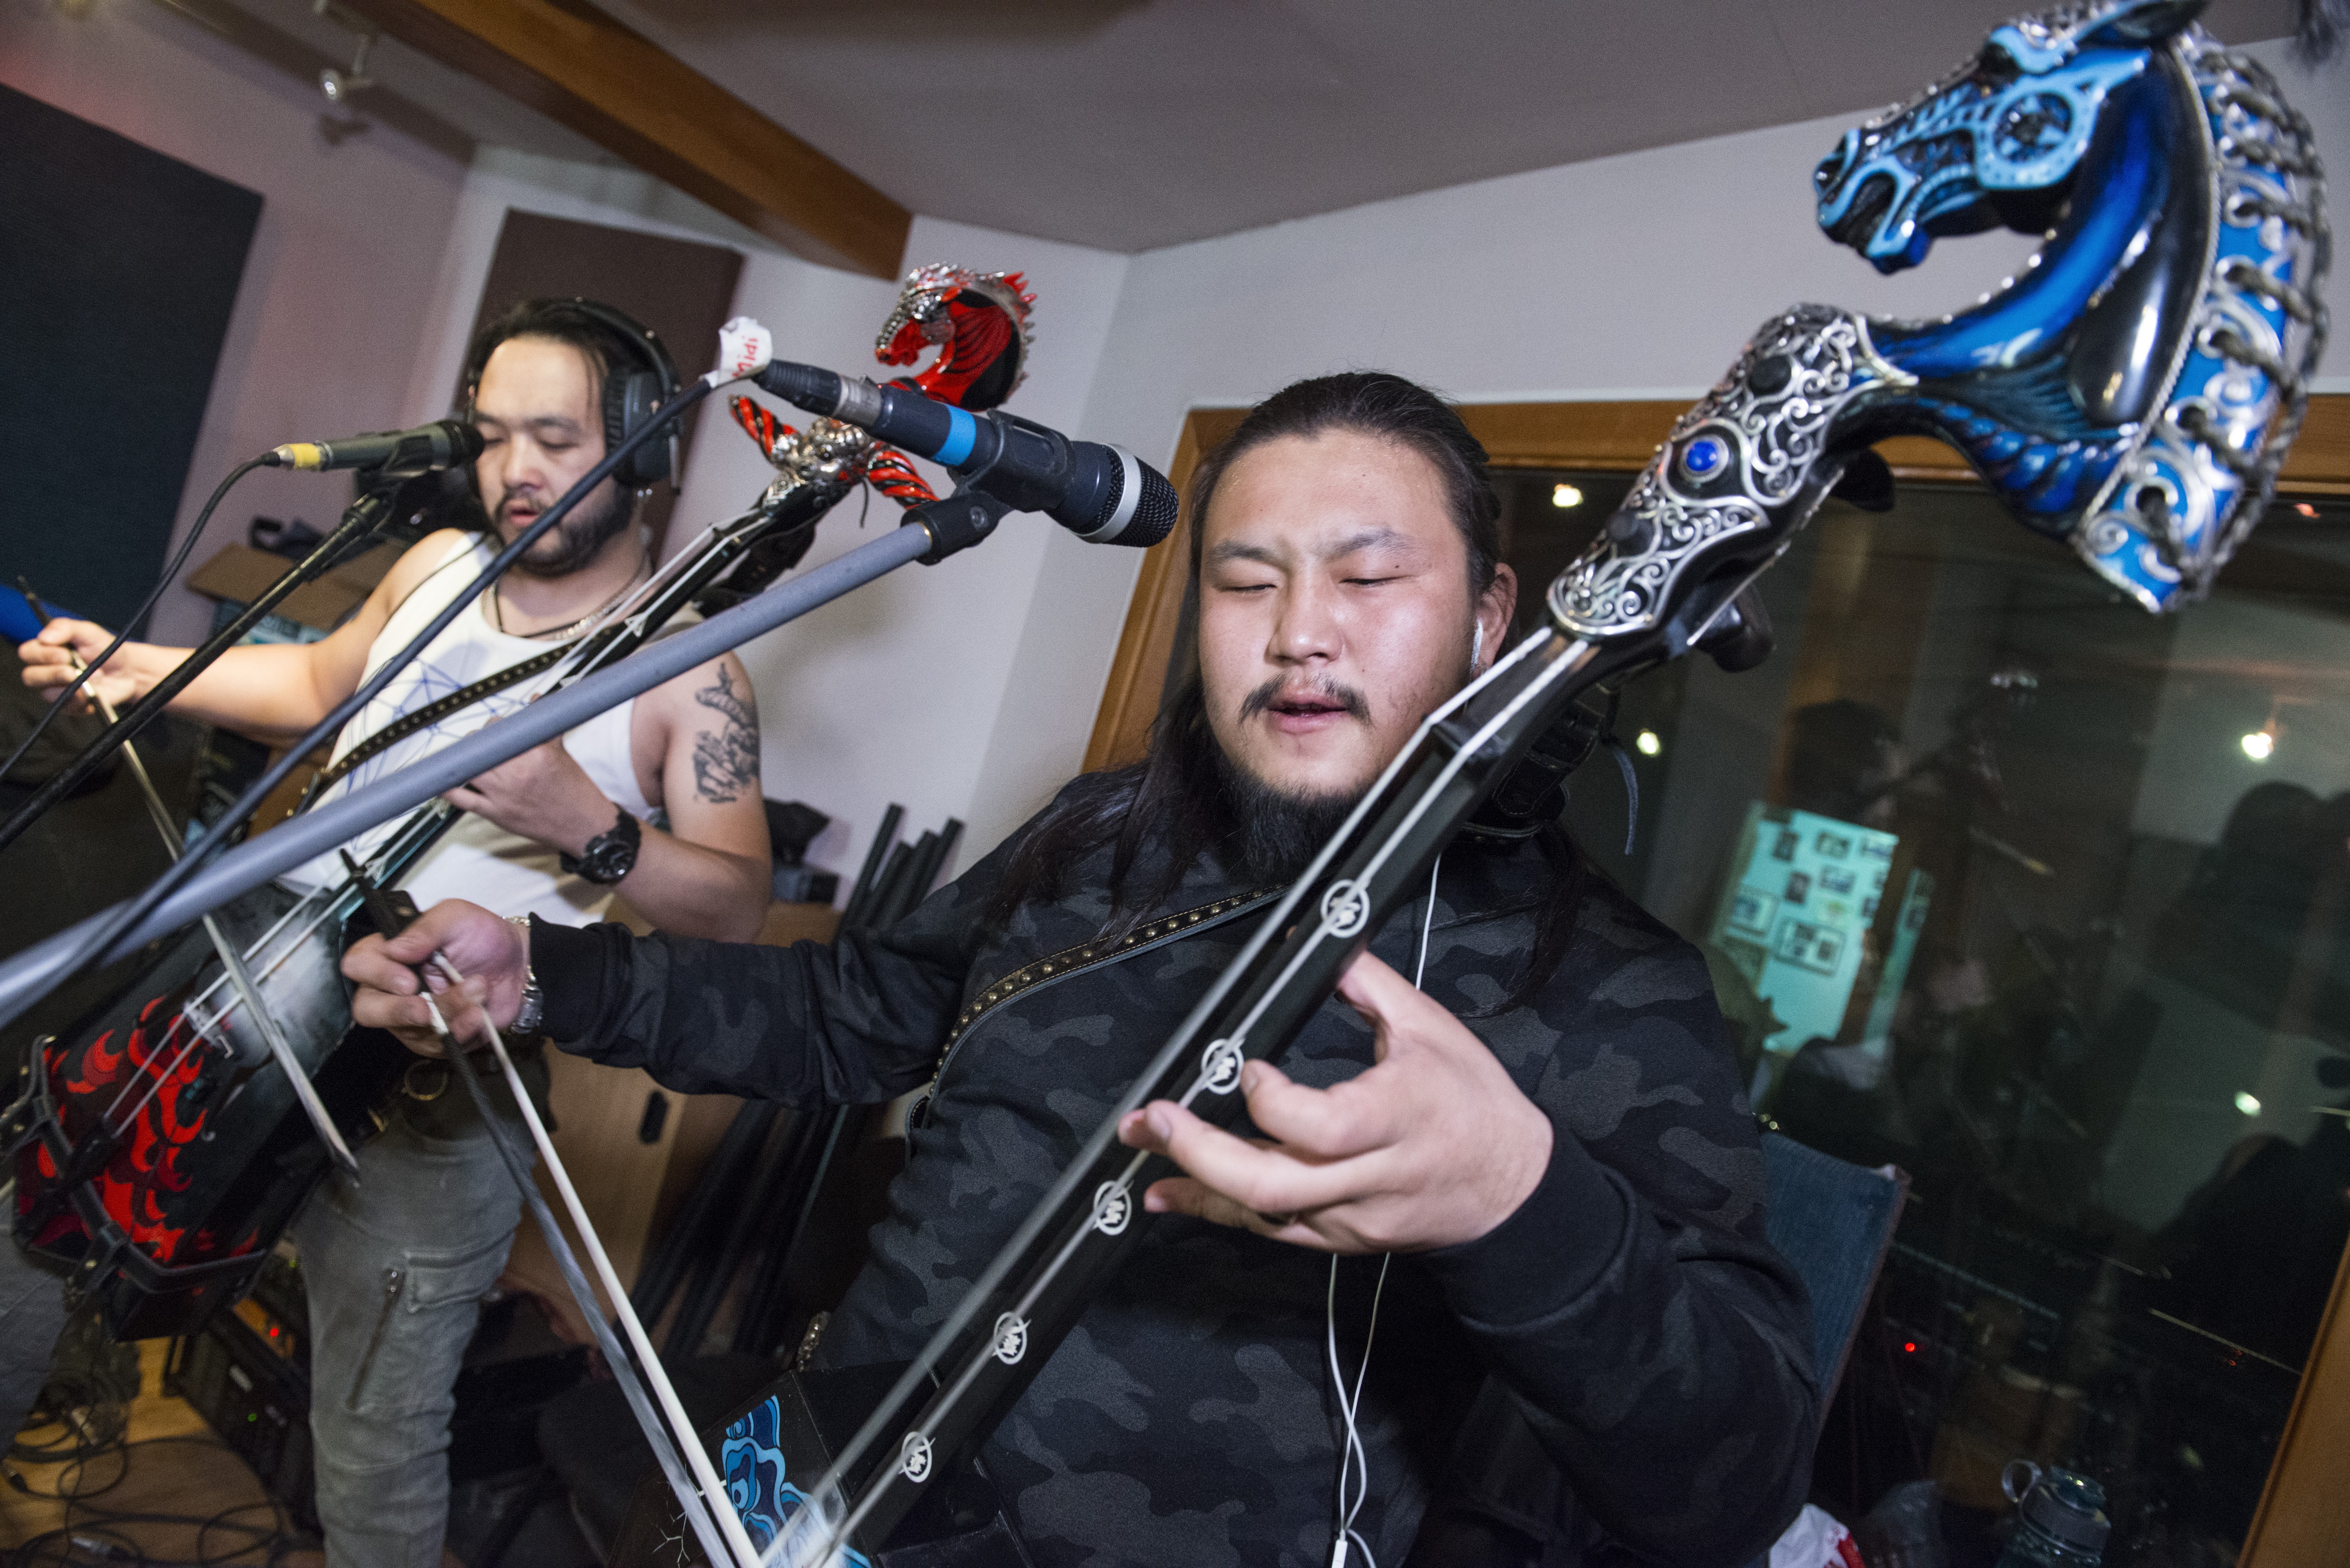 Enkhush and Gala play the morin khuur during a rehearsal in The Hu's studio. Photo: Zigor Aldama